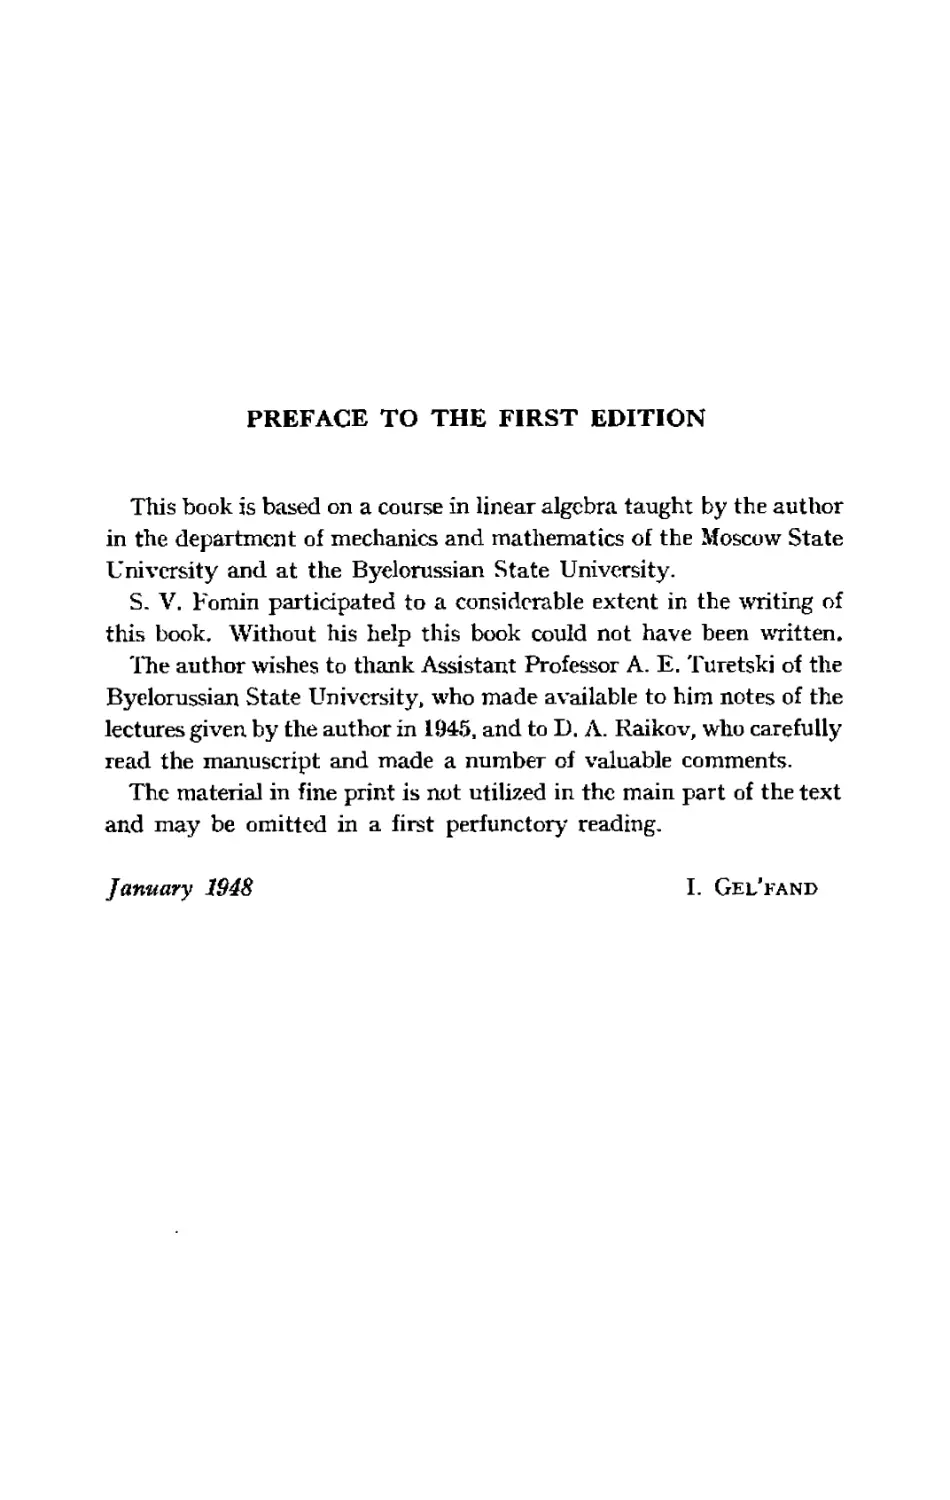 Preface to the first edition